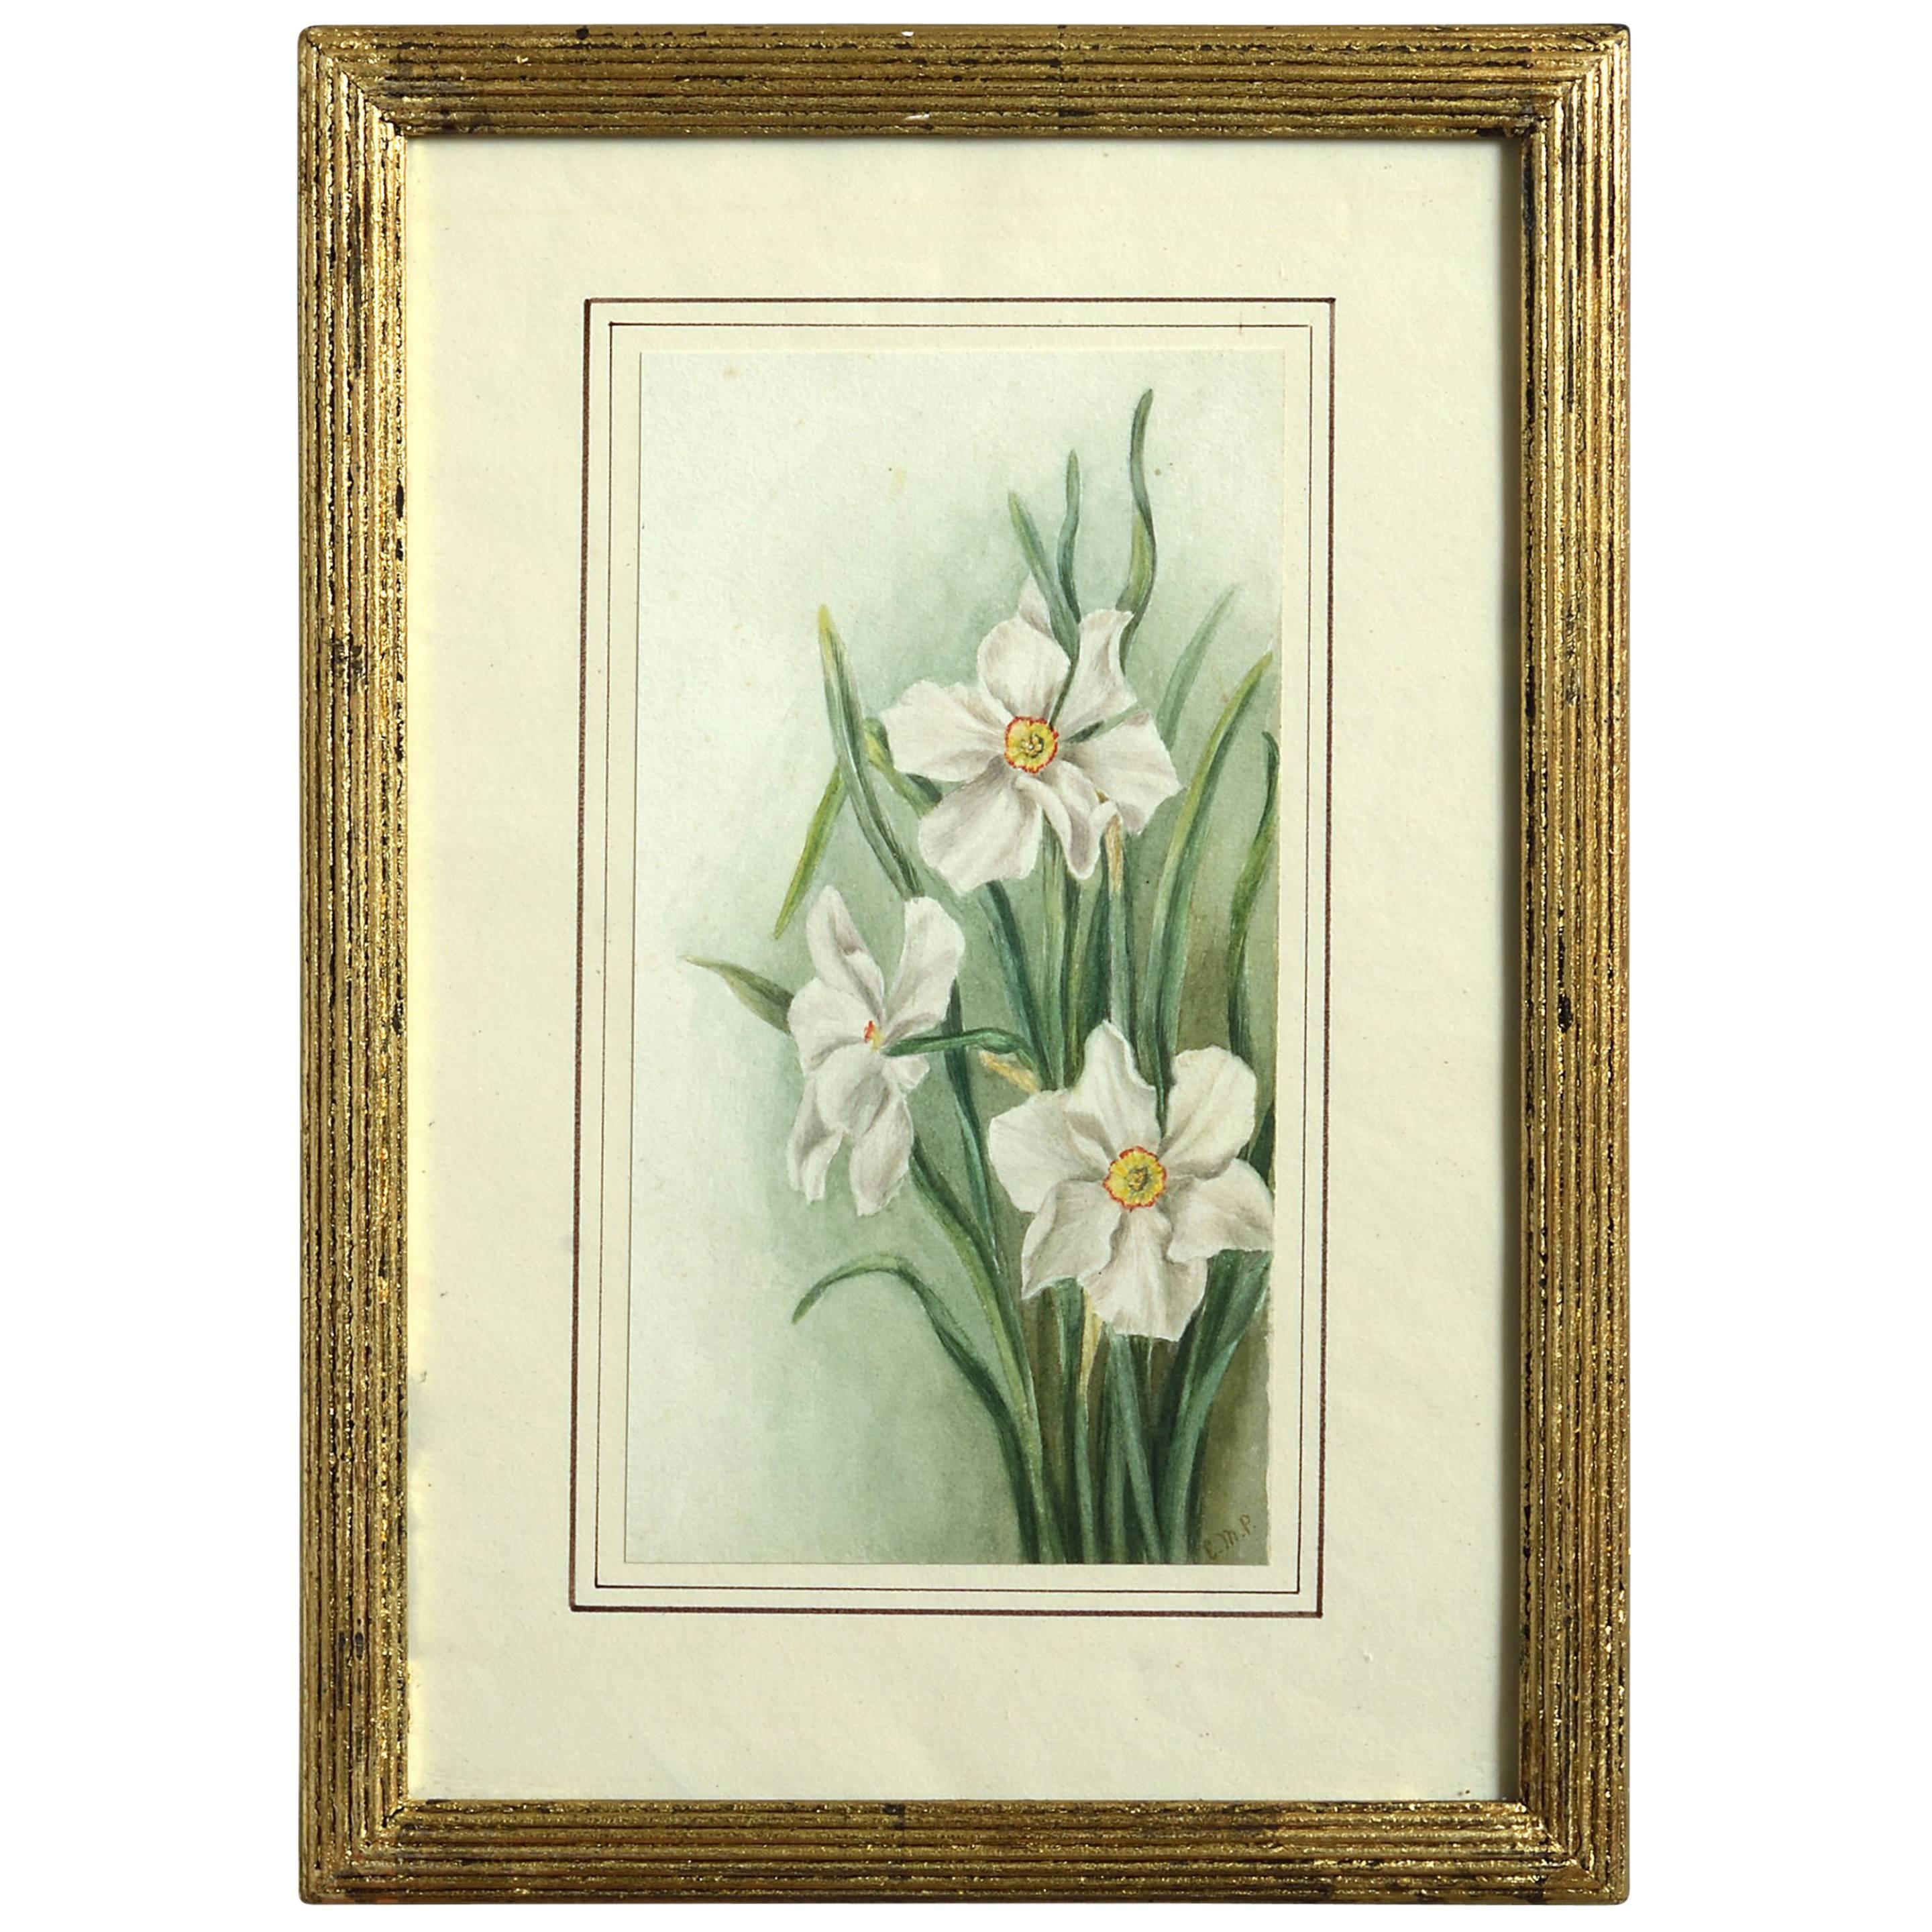 Late 19th Century Watercolor Study of Narcissi